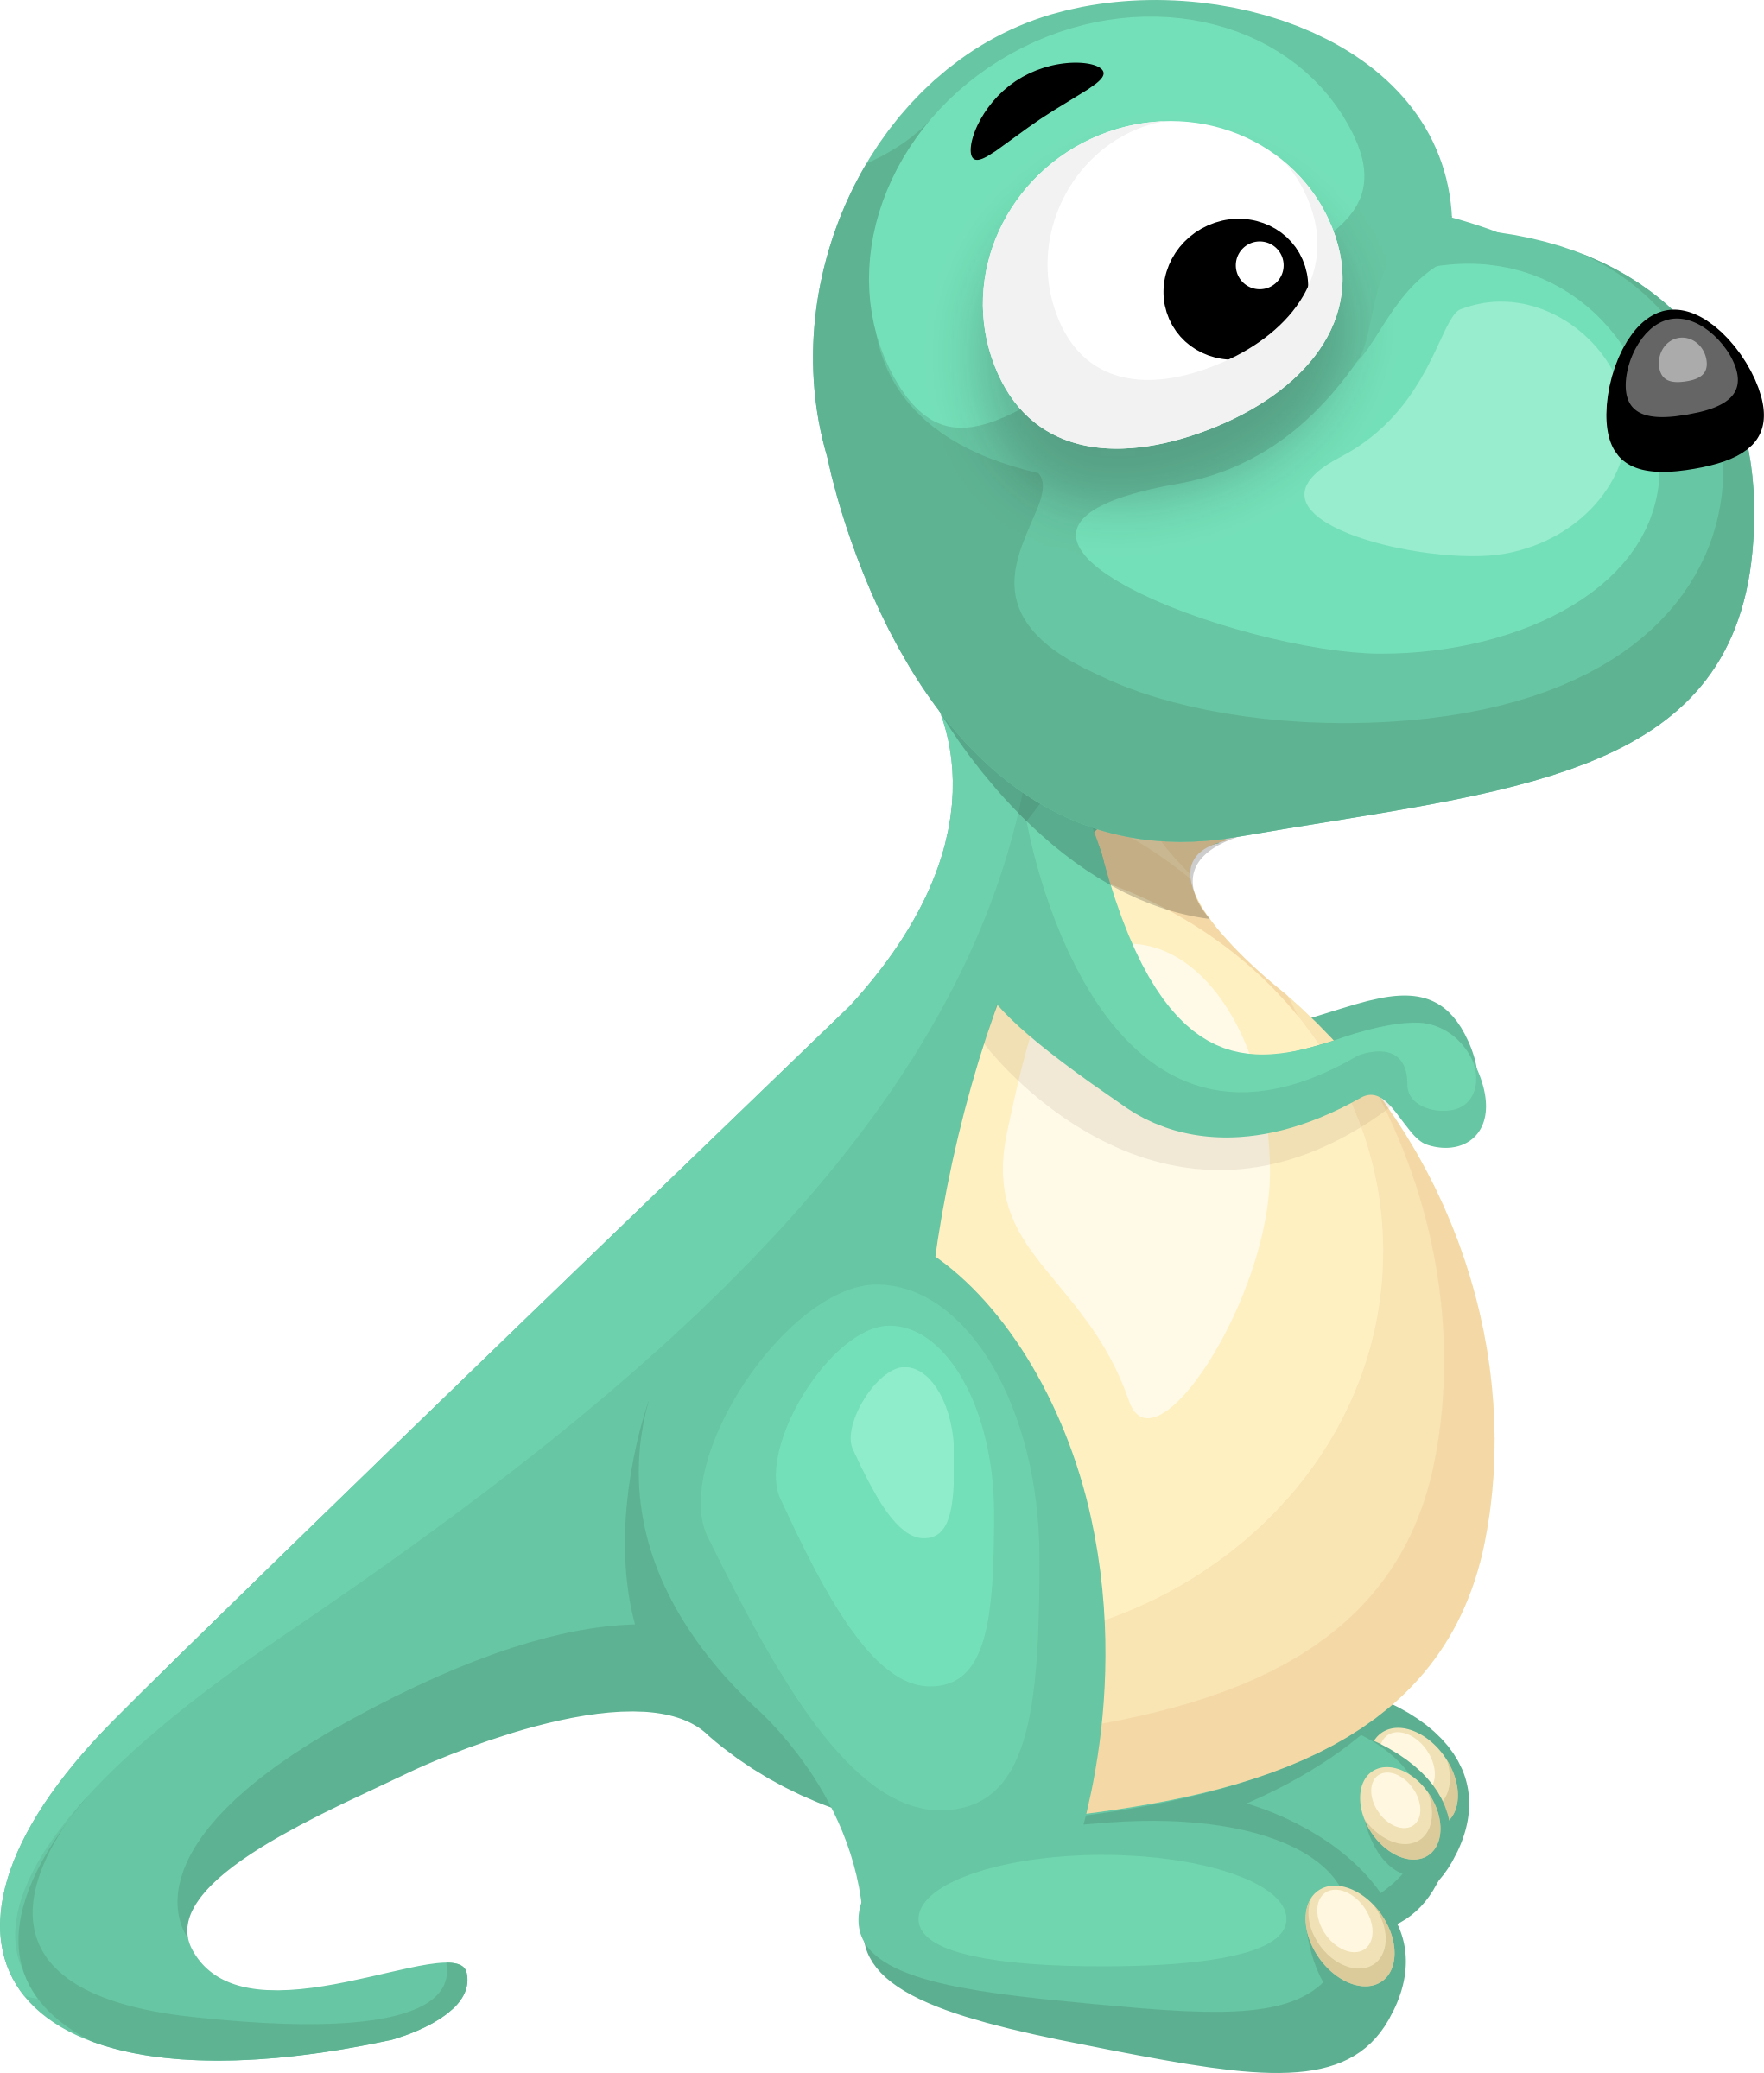 Download Turquoise Dinosaur Vector Clipart image - Free stock photo - Public Domain photo - CC0 Images